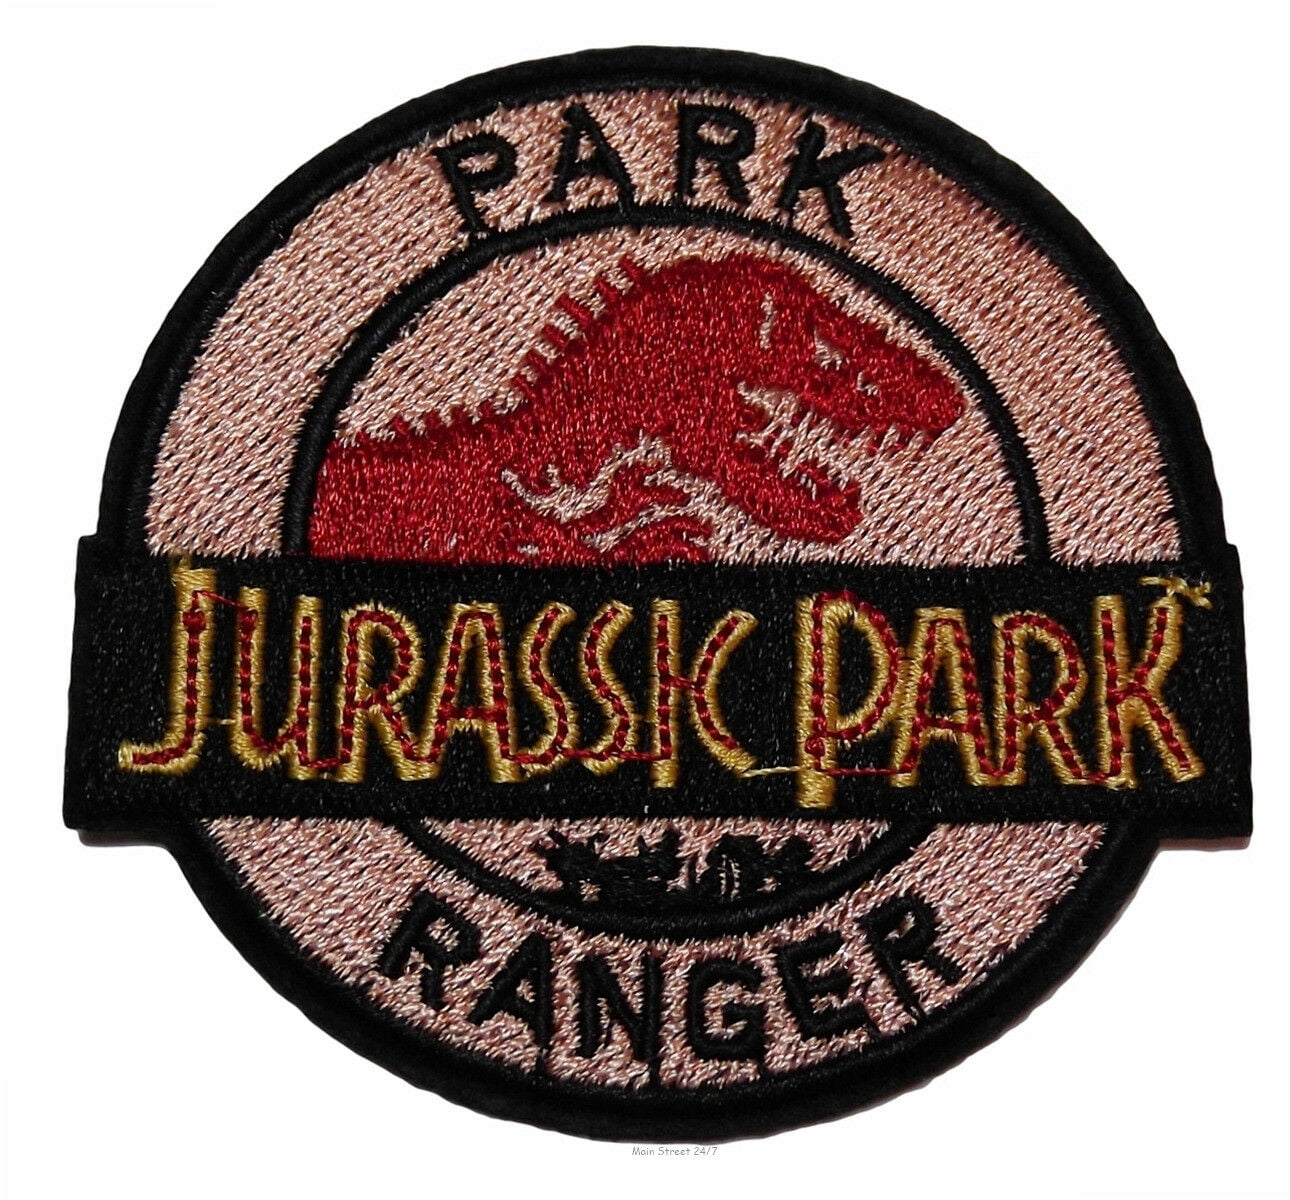 Jurassic Park Movie Logo Embroidered Tactical Morale Hook Patch Green Badge 